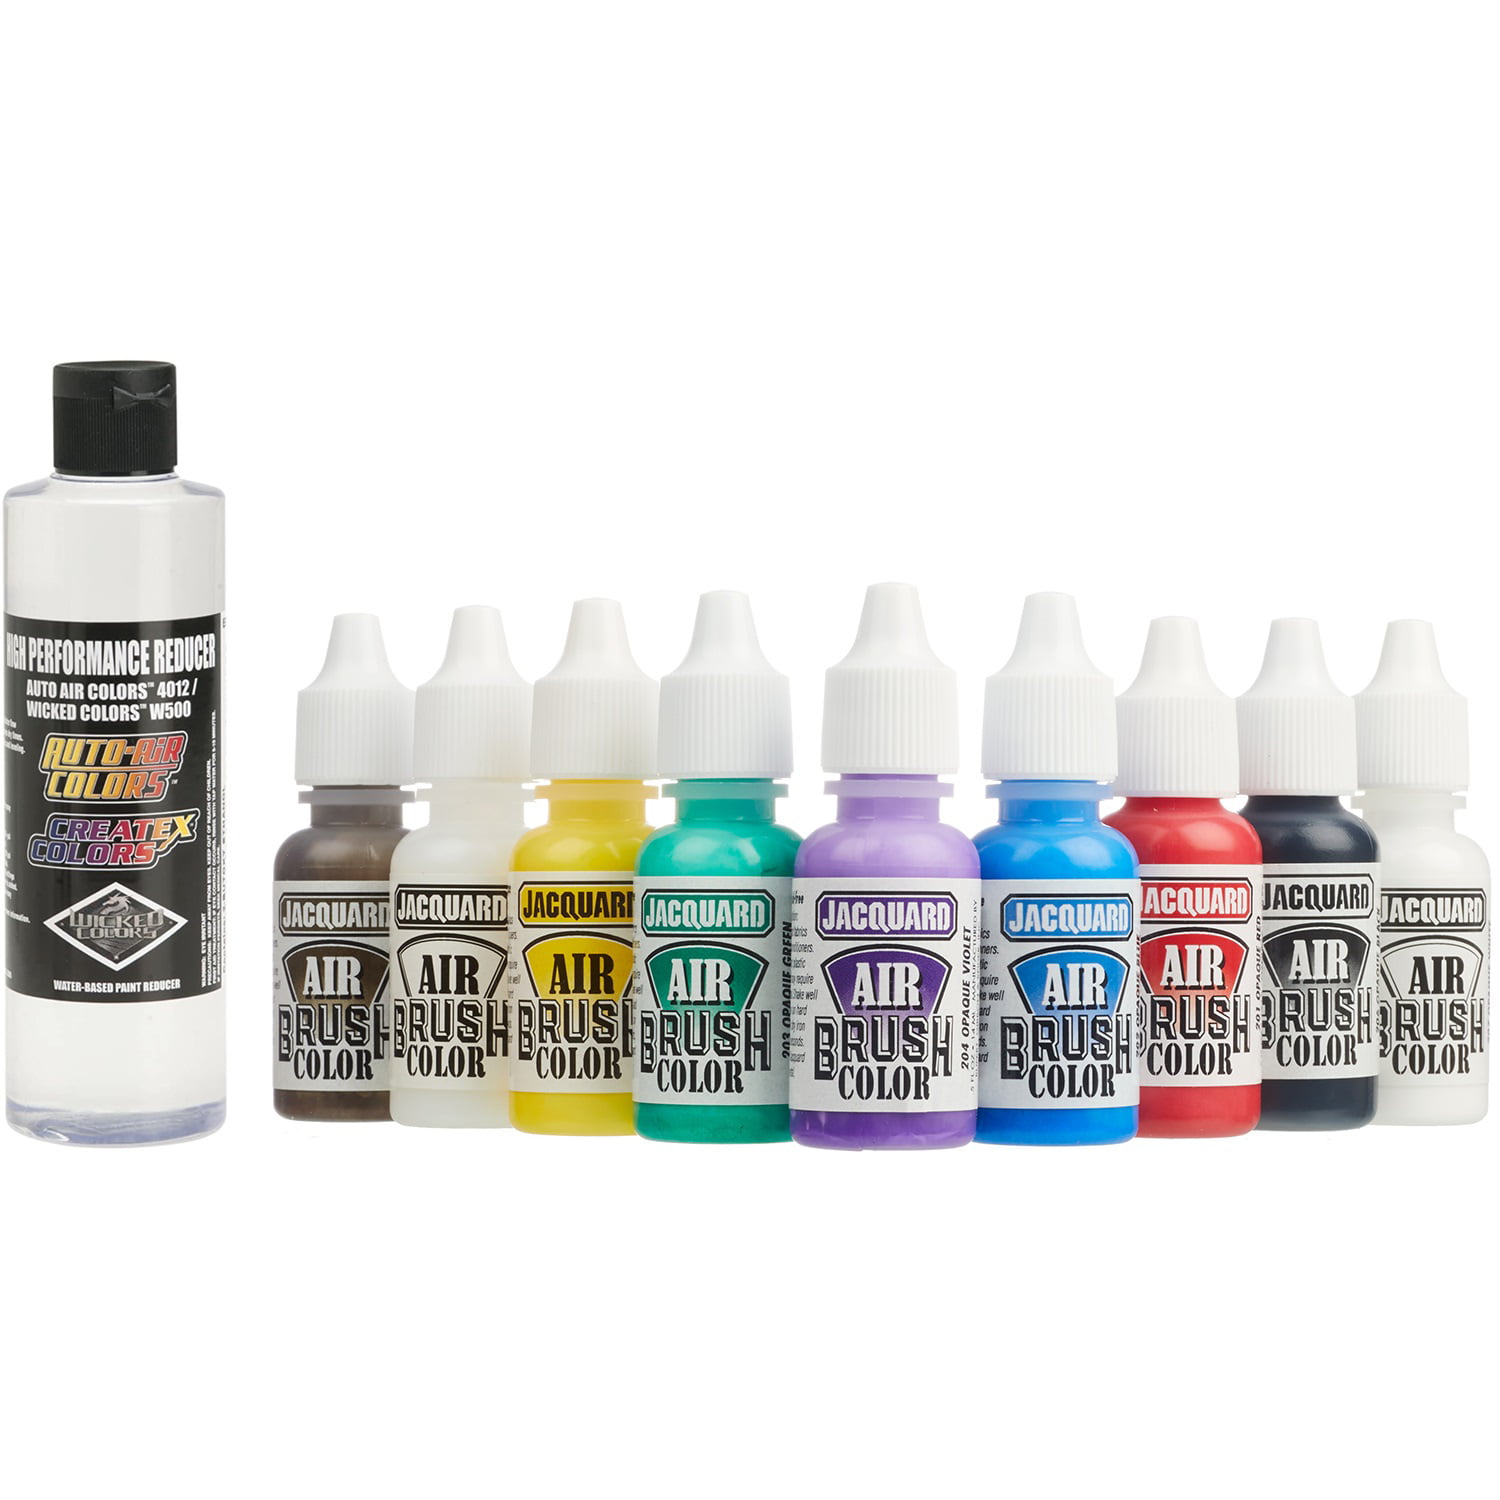 Jacquard Airbrush Paint Set - Opaque Colors Exciter Pack - 9-1/2 fl oz  Acrylic Paint Bottles - Bundled with Set of Moshify 5 Piece Airbrush  Cleaning